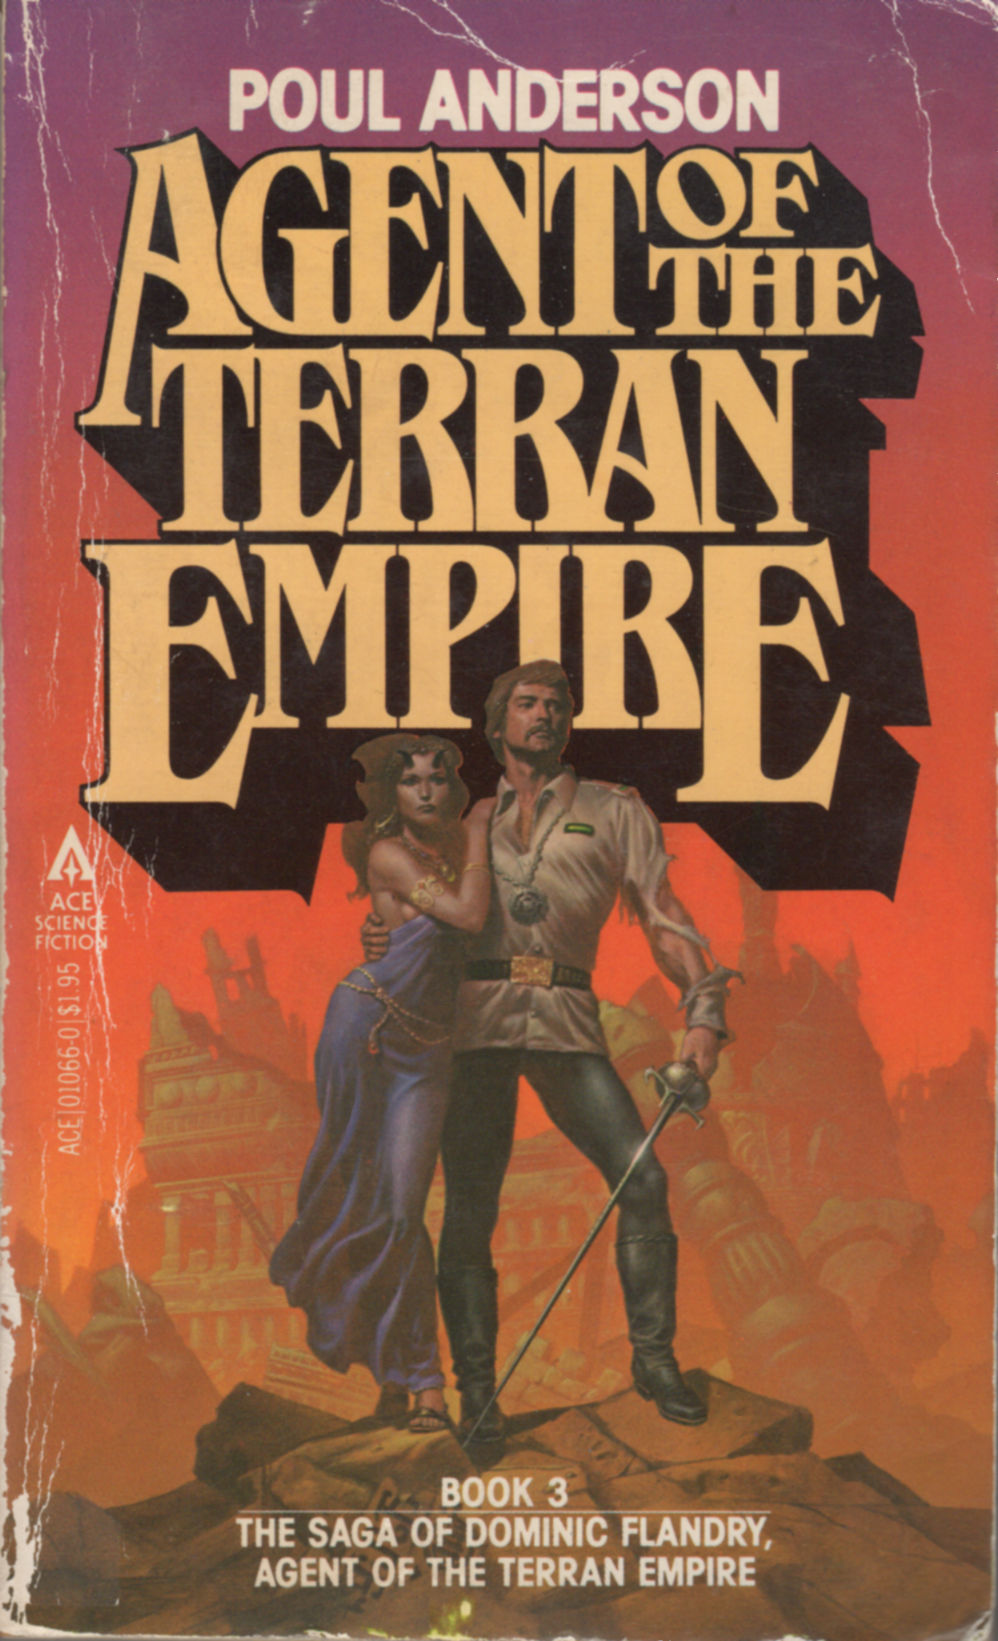 Image - cover of Agent of the Terran Empire by Poul Anderson